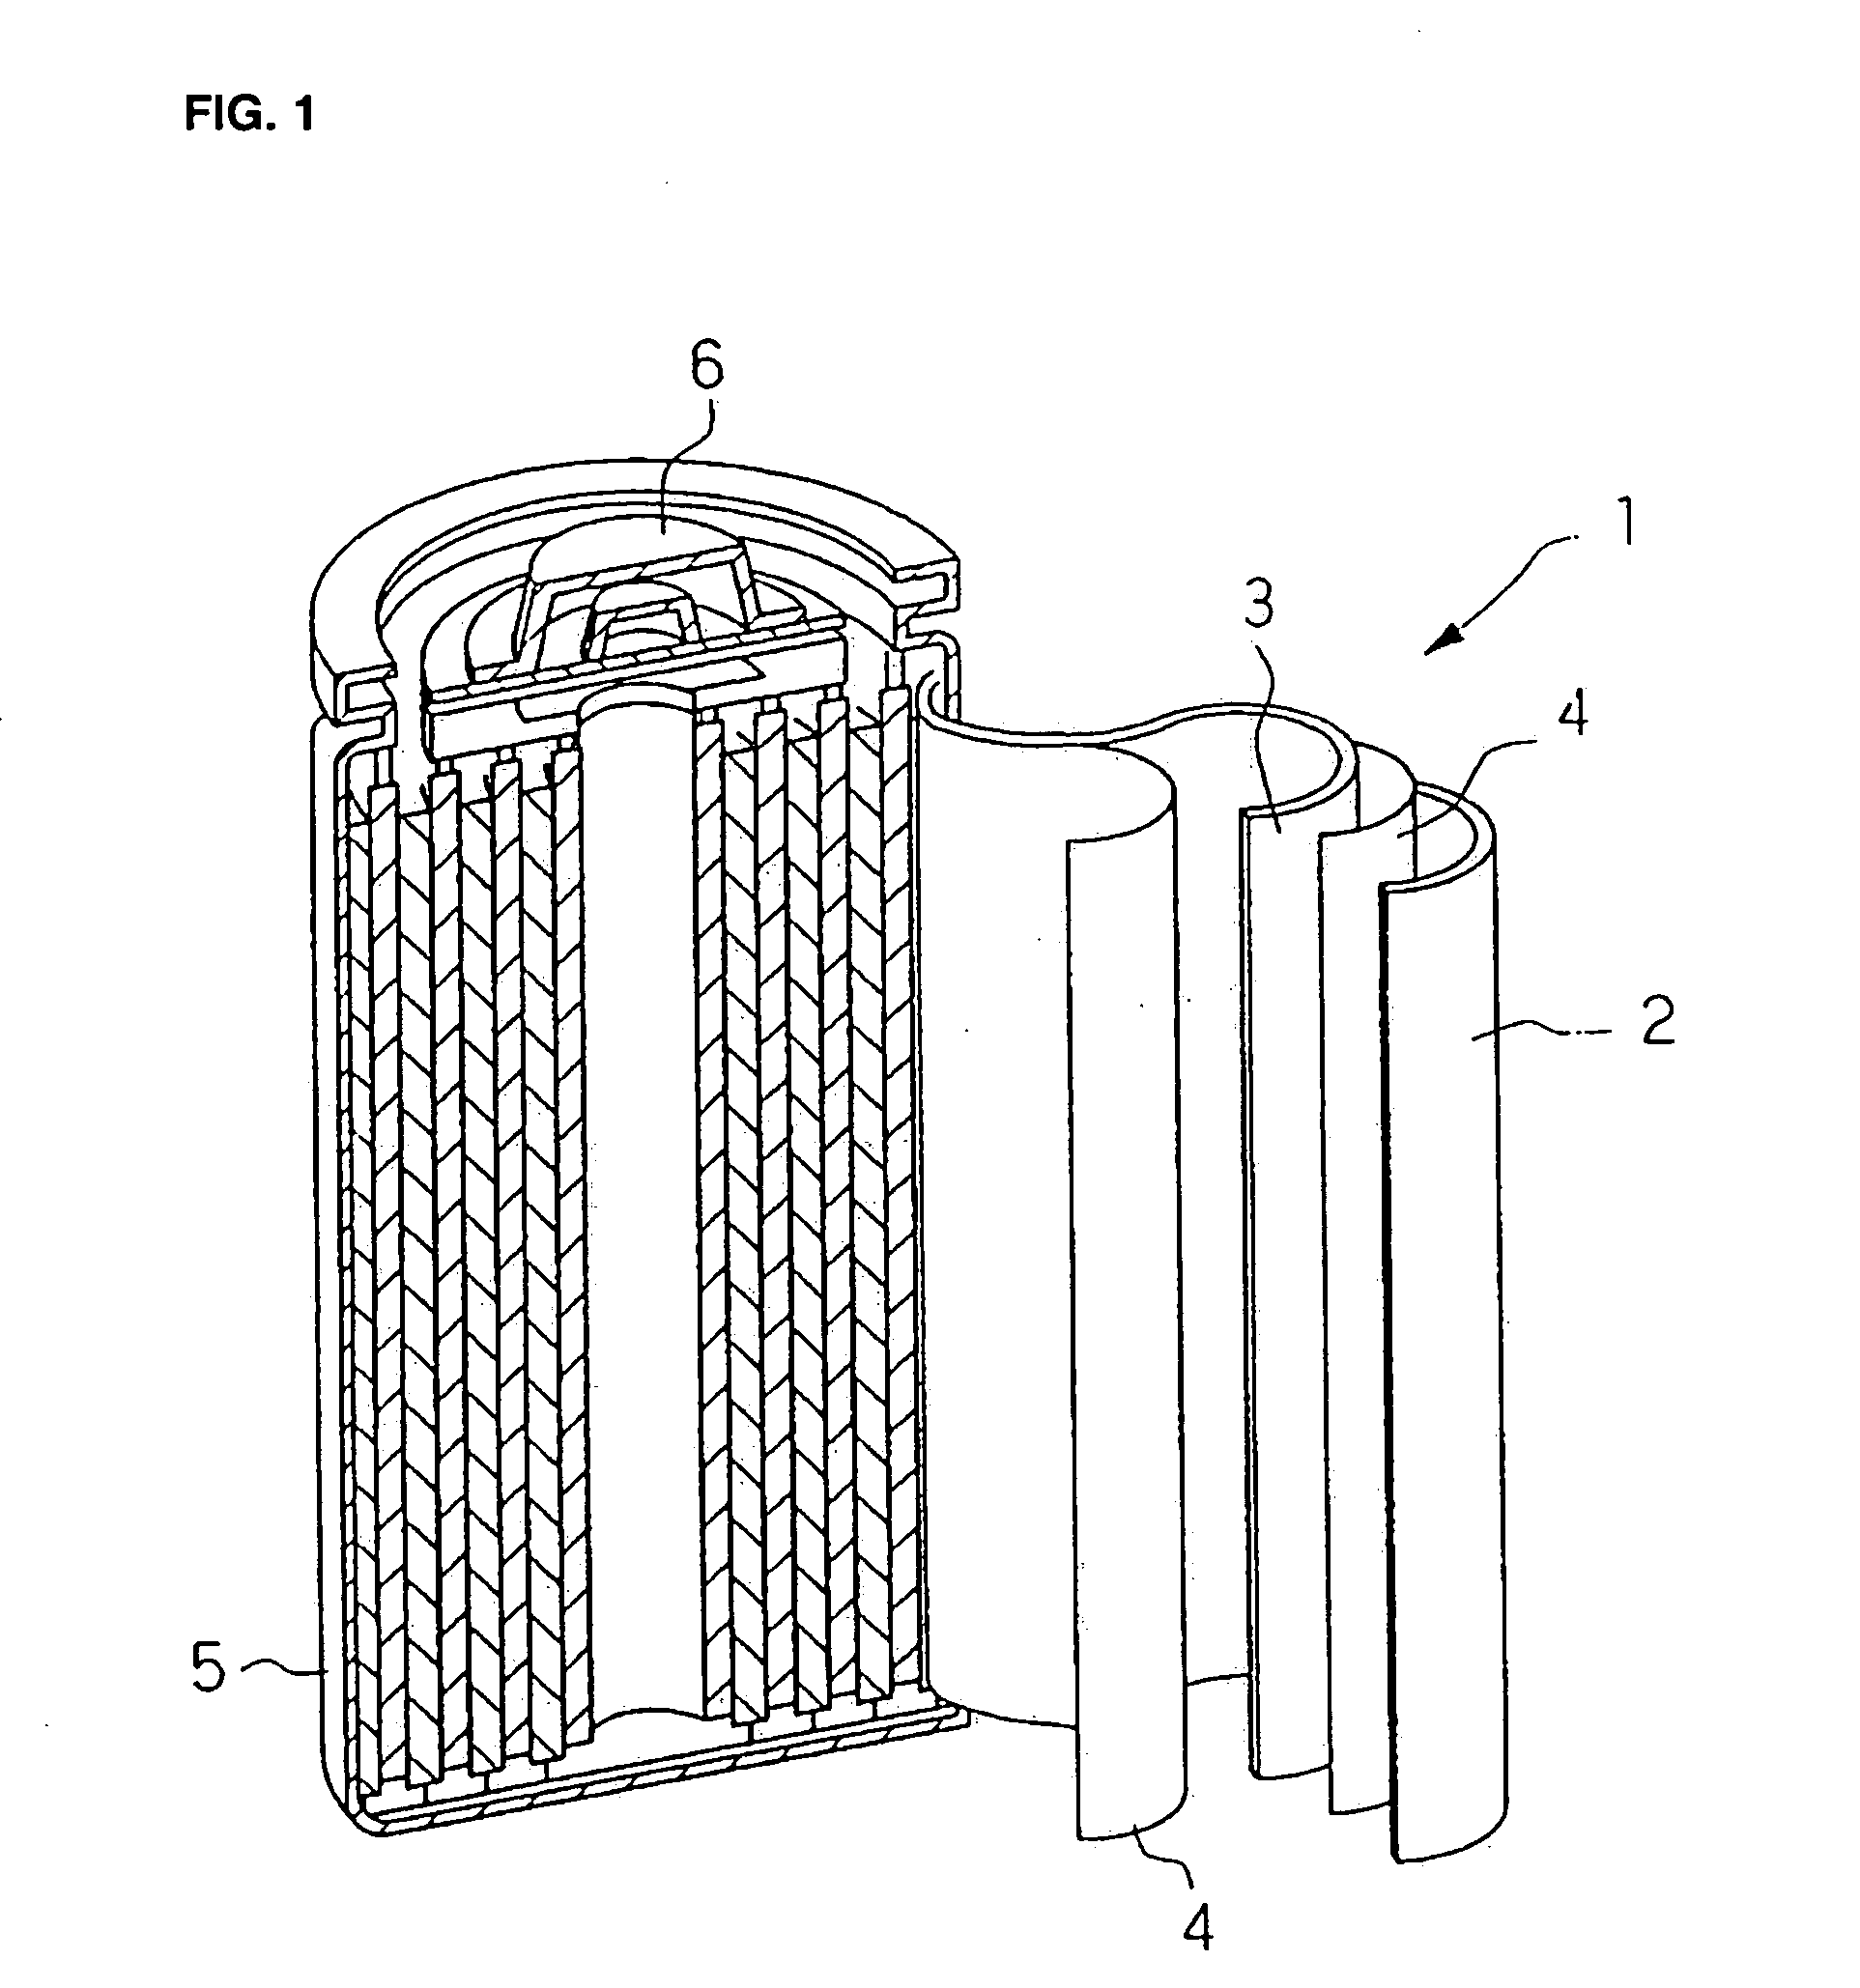 Positive active material for rechargeable lithium battery, method of preparing same, and rechargeable lithium battery comprising same